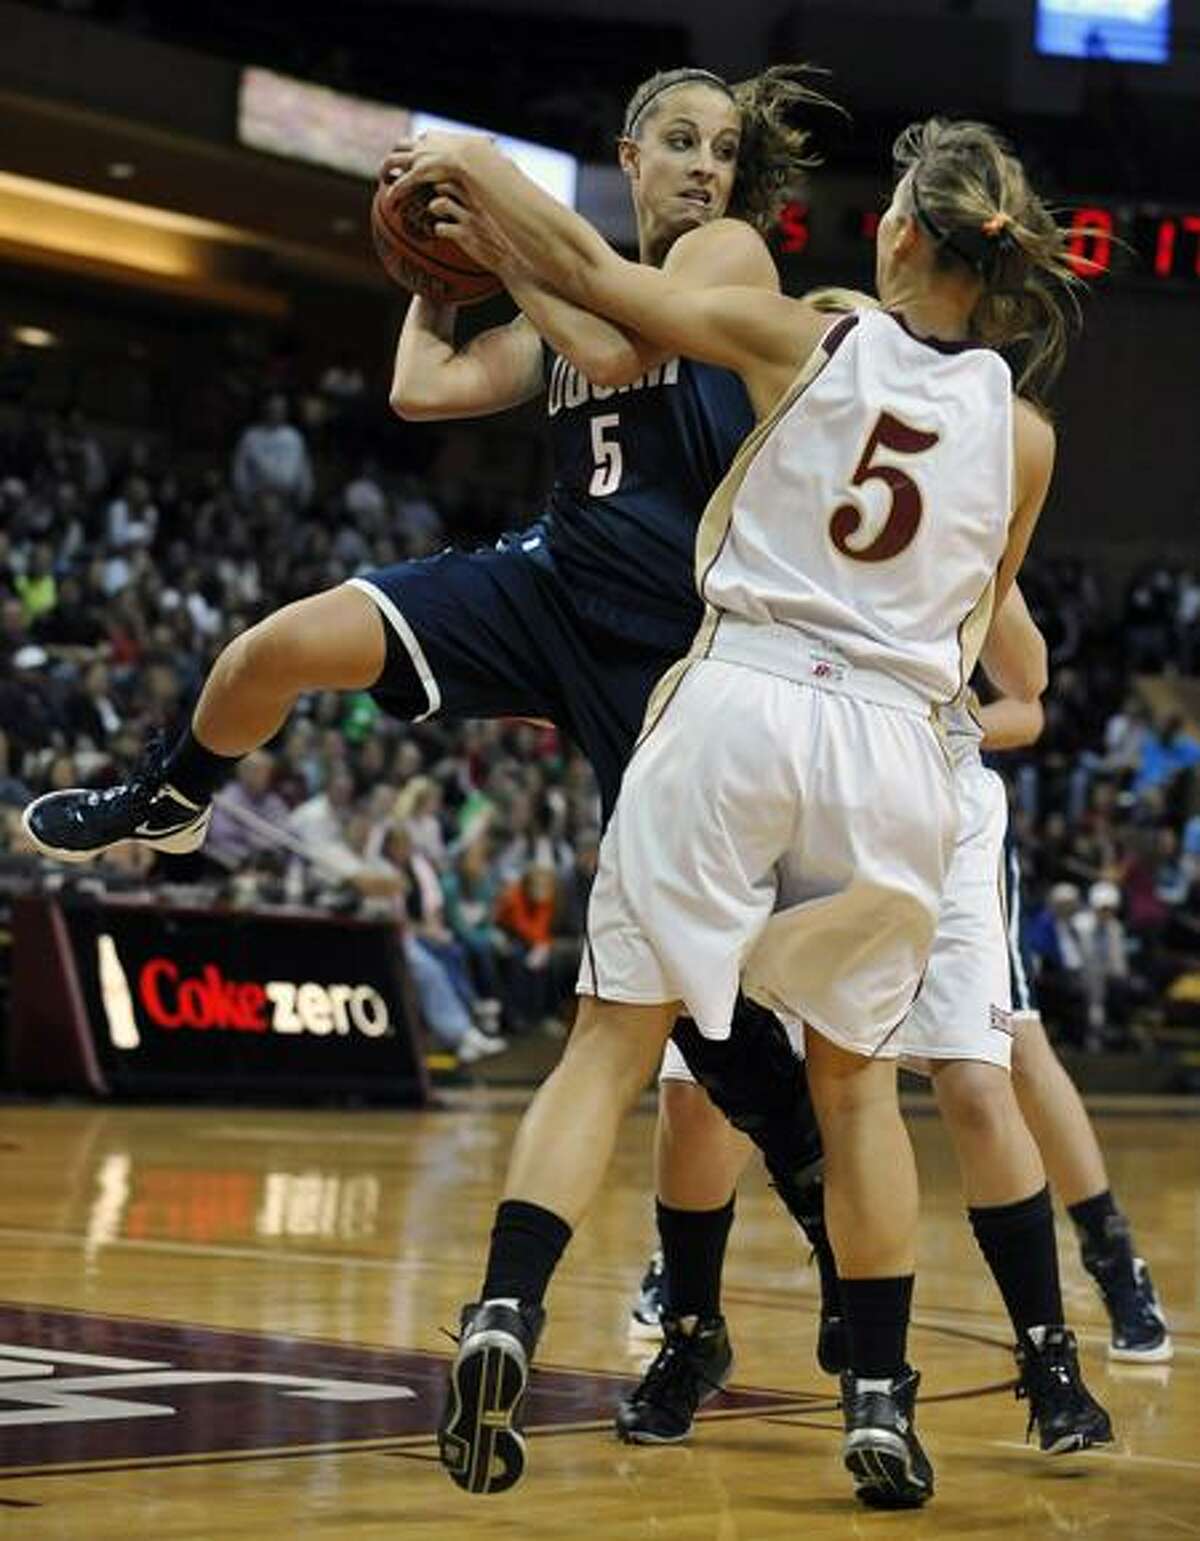 Connecticut's Caroline Doty, left, looks to pass as College of Charleston's Cathryn Hardy defends during the first half of an NCAA college basketball game on Wednesday, Dec. 21, 2011, in Charleston, S.C. (AP Photo/Rainier Ehrhardt)